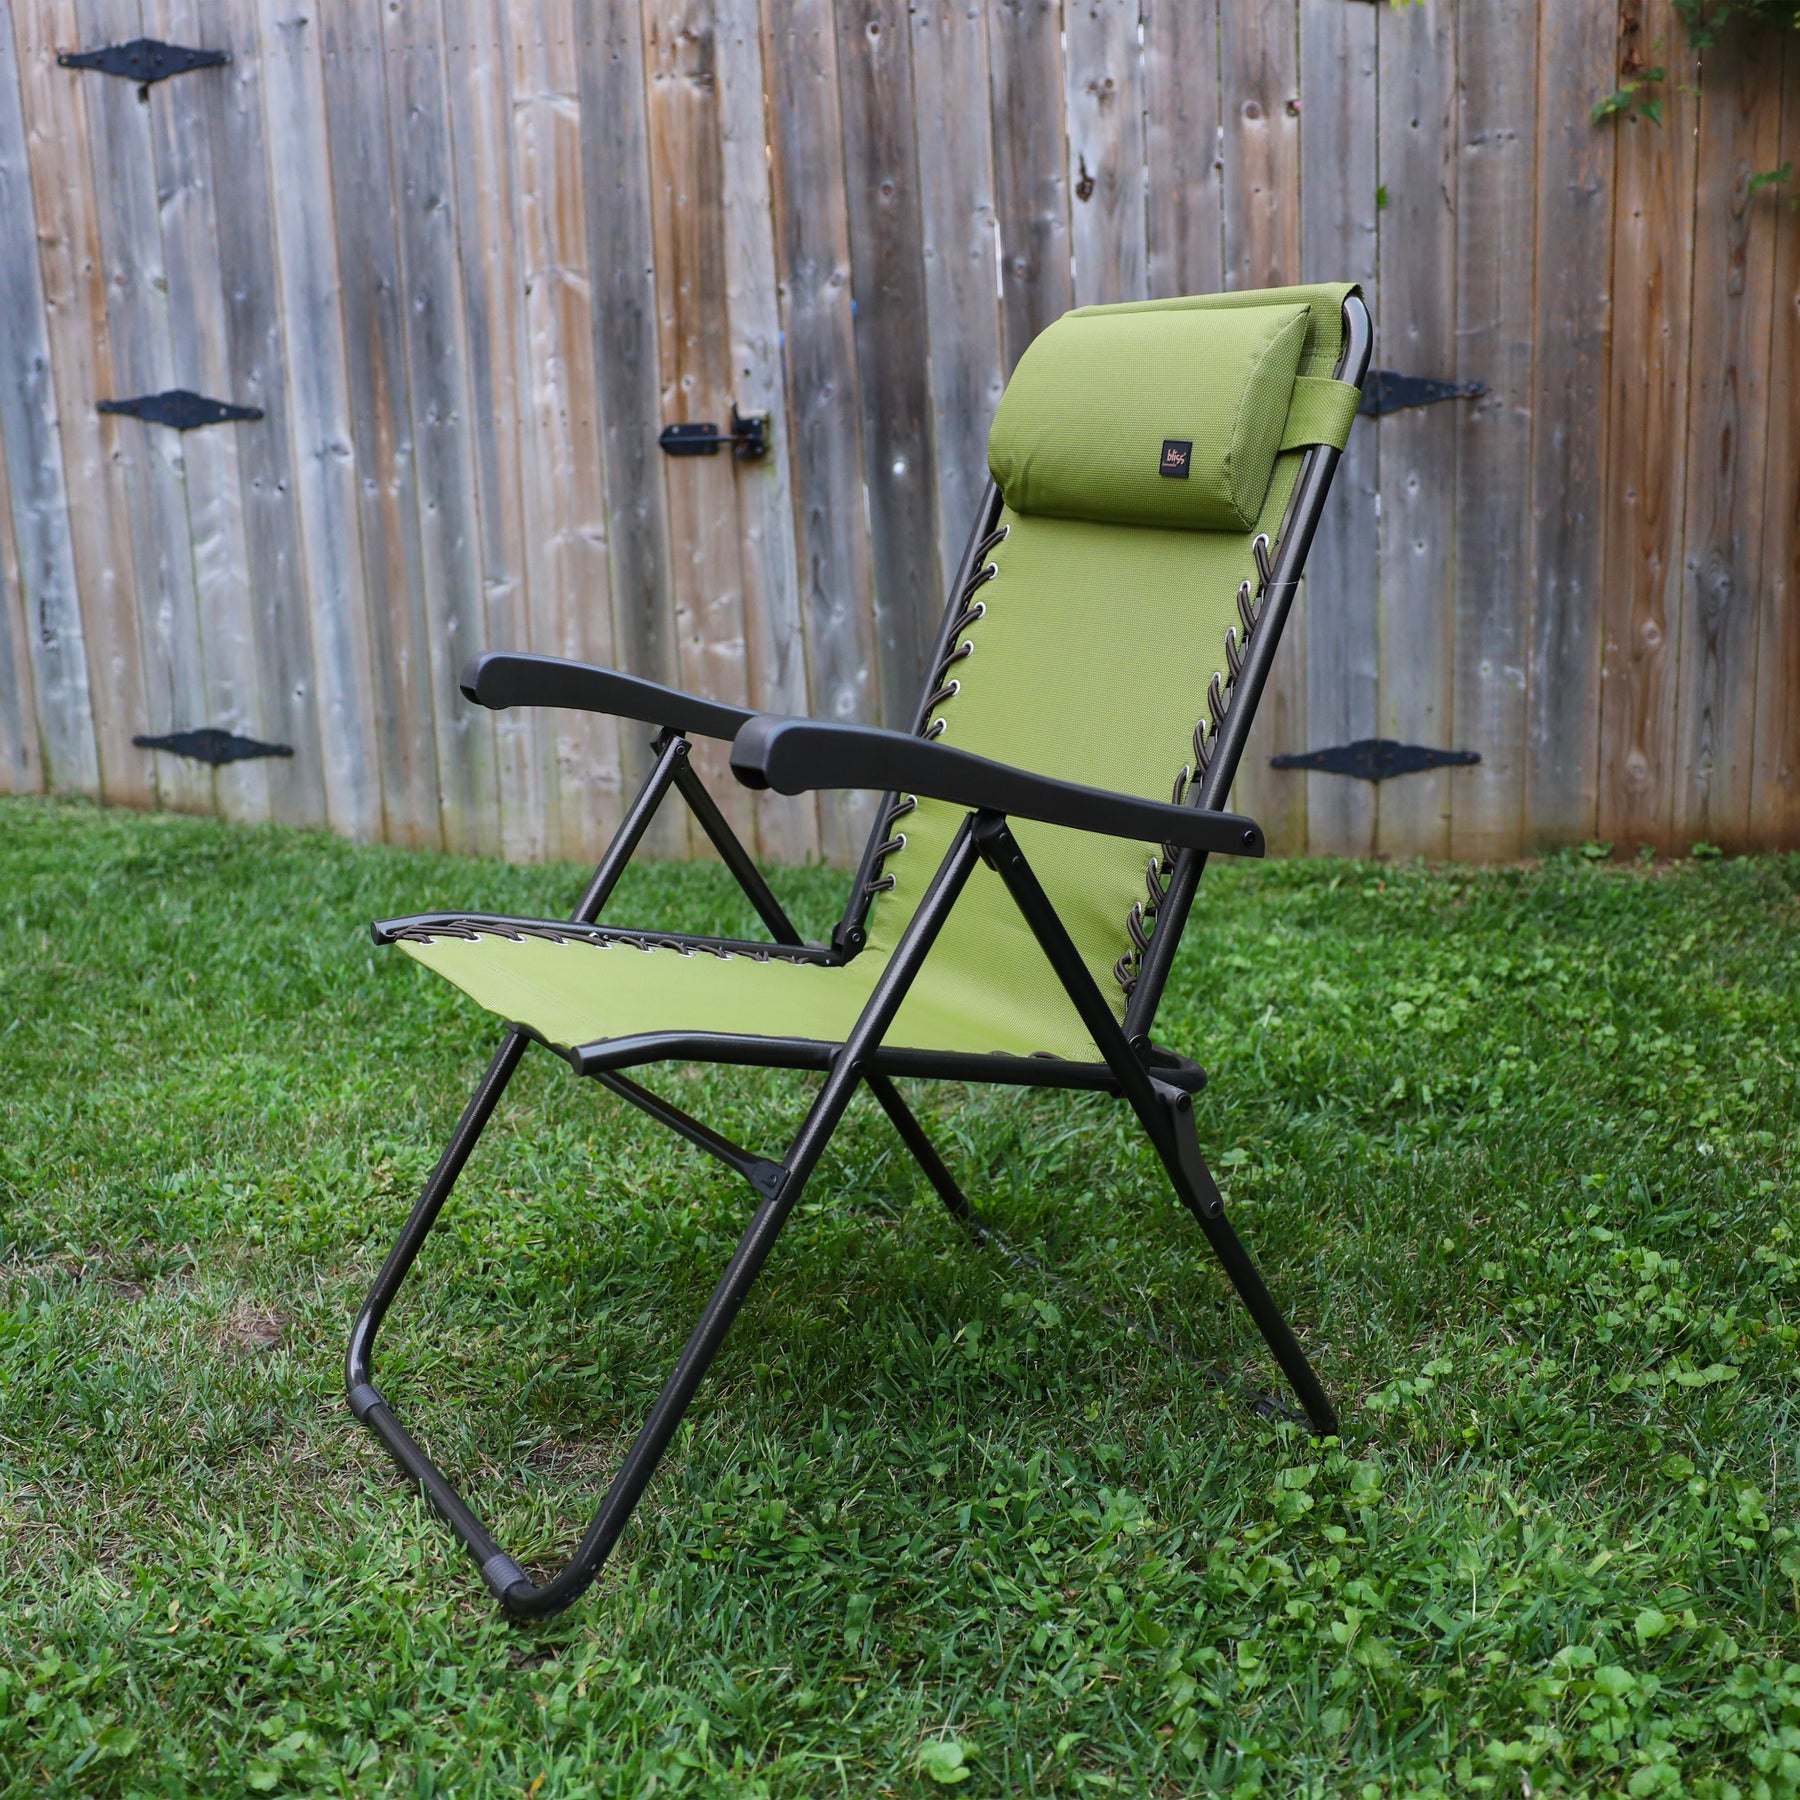 26-inch Reclining Sage green Sling Chair on a lawn next to a fence.